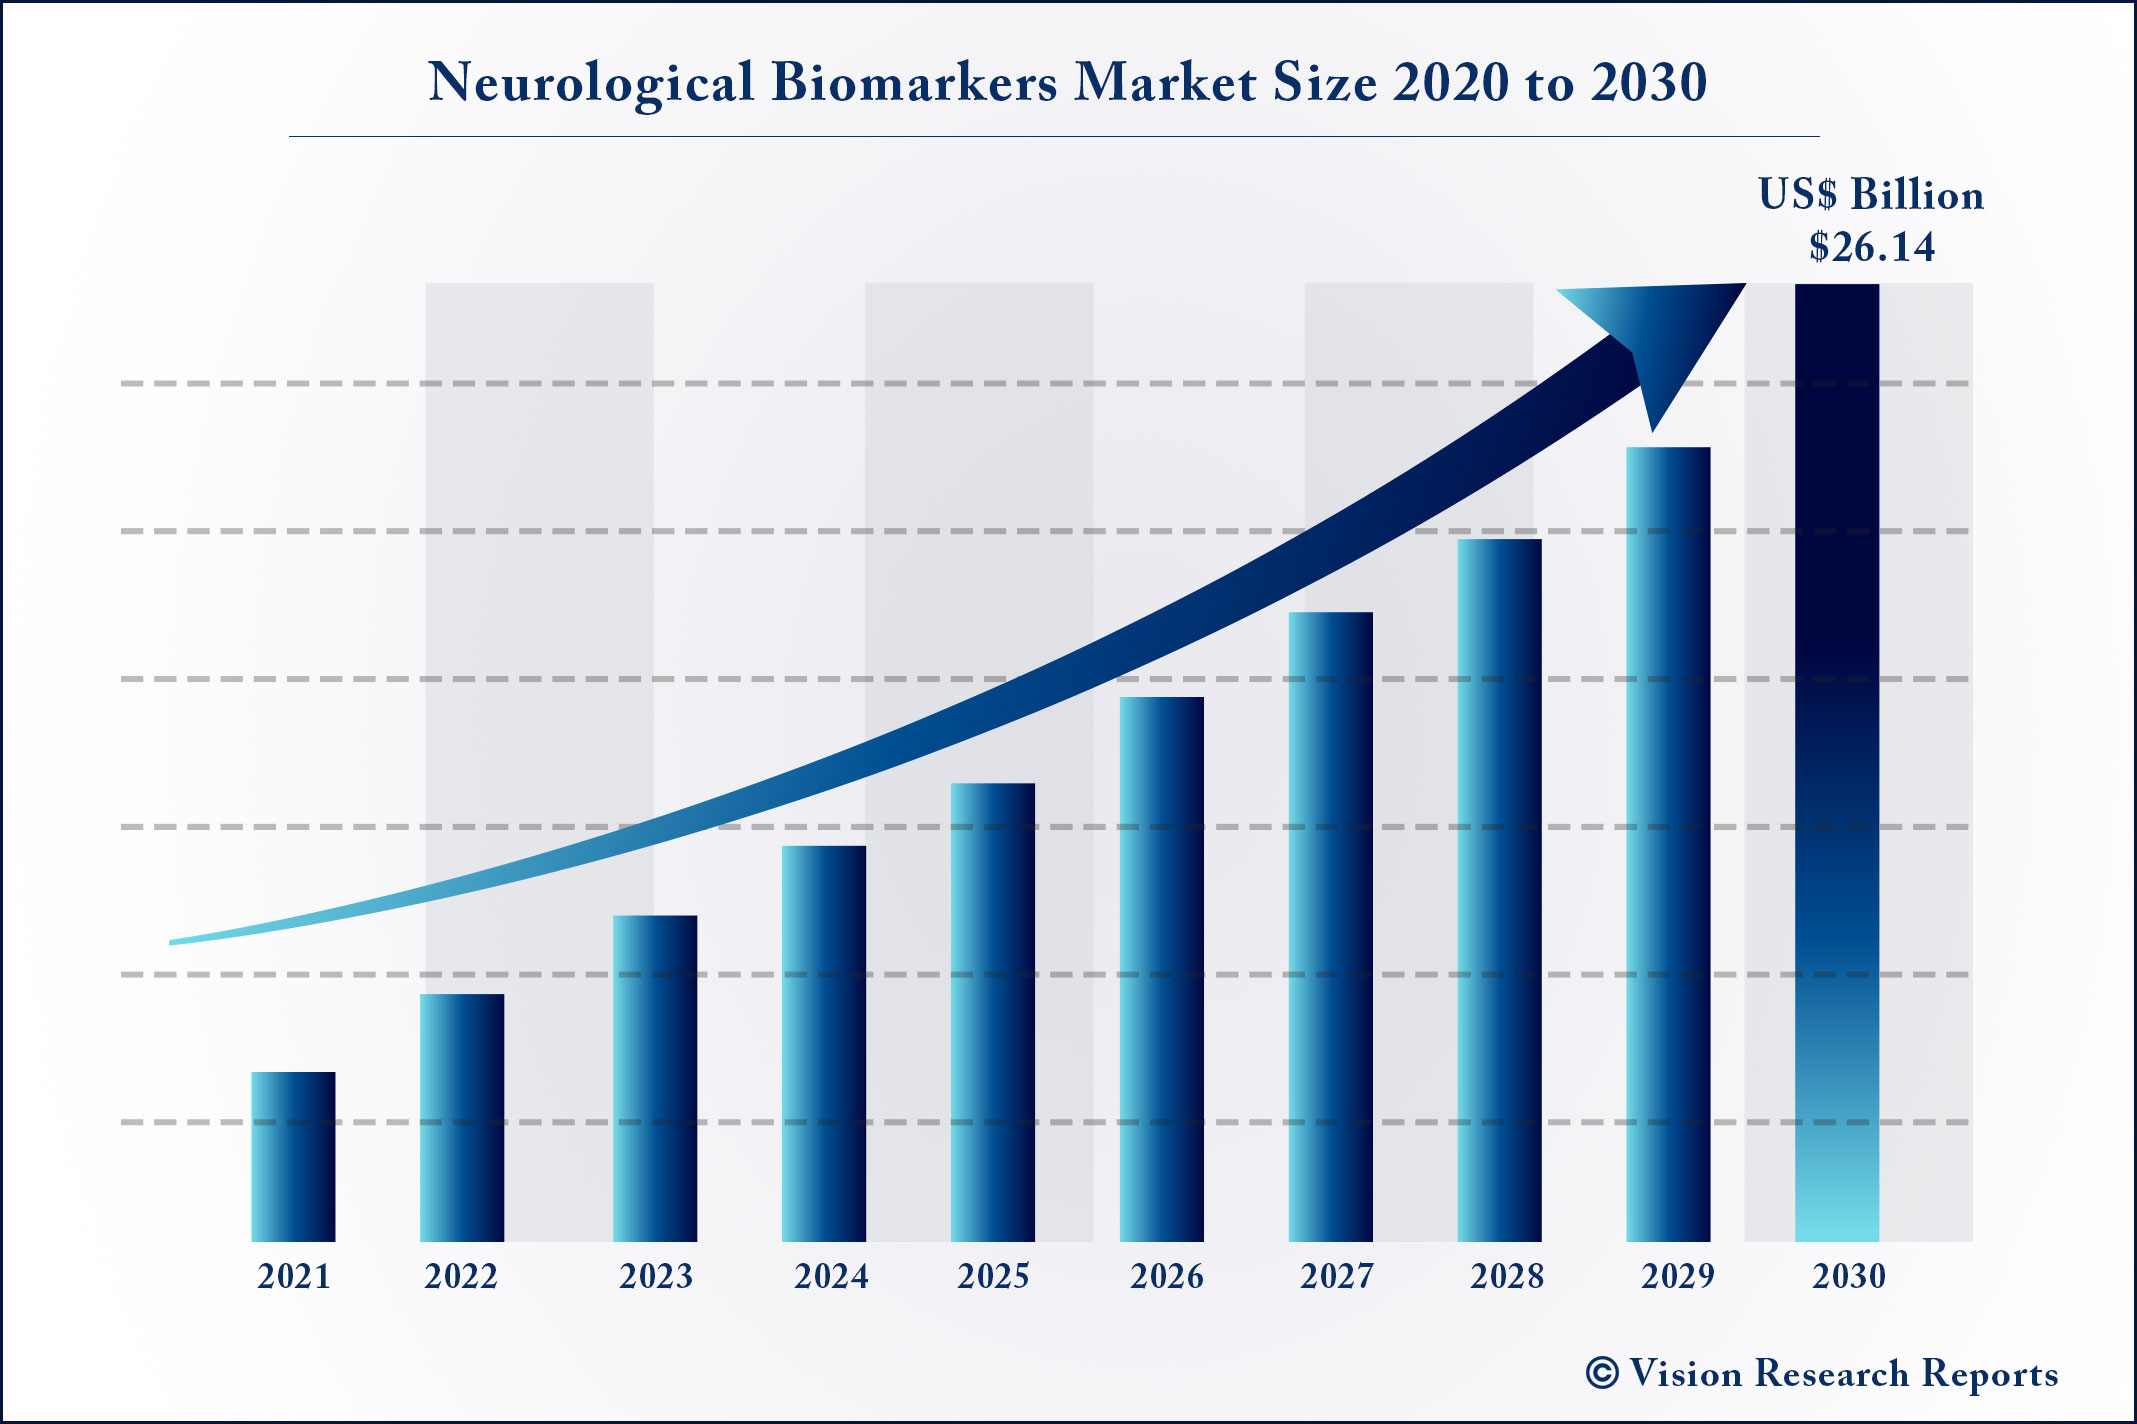 Neurological Biomarkers Market Size 2020 to 2030